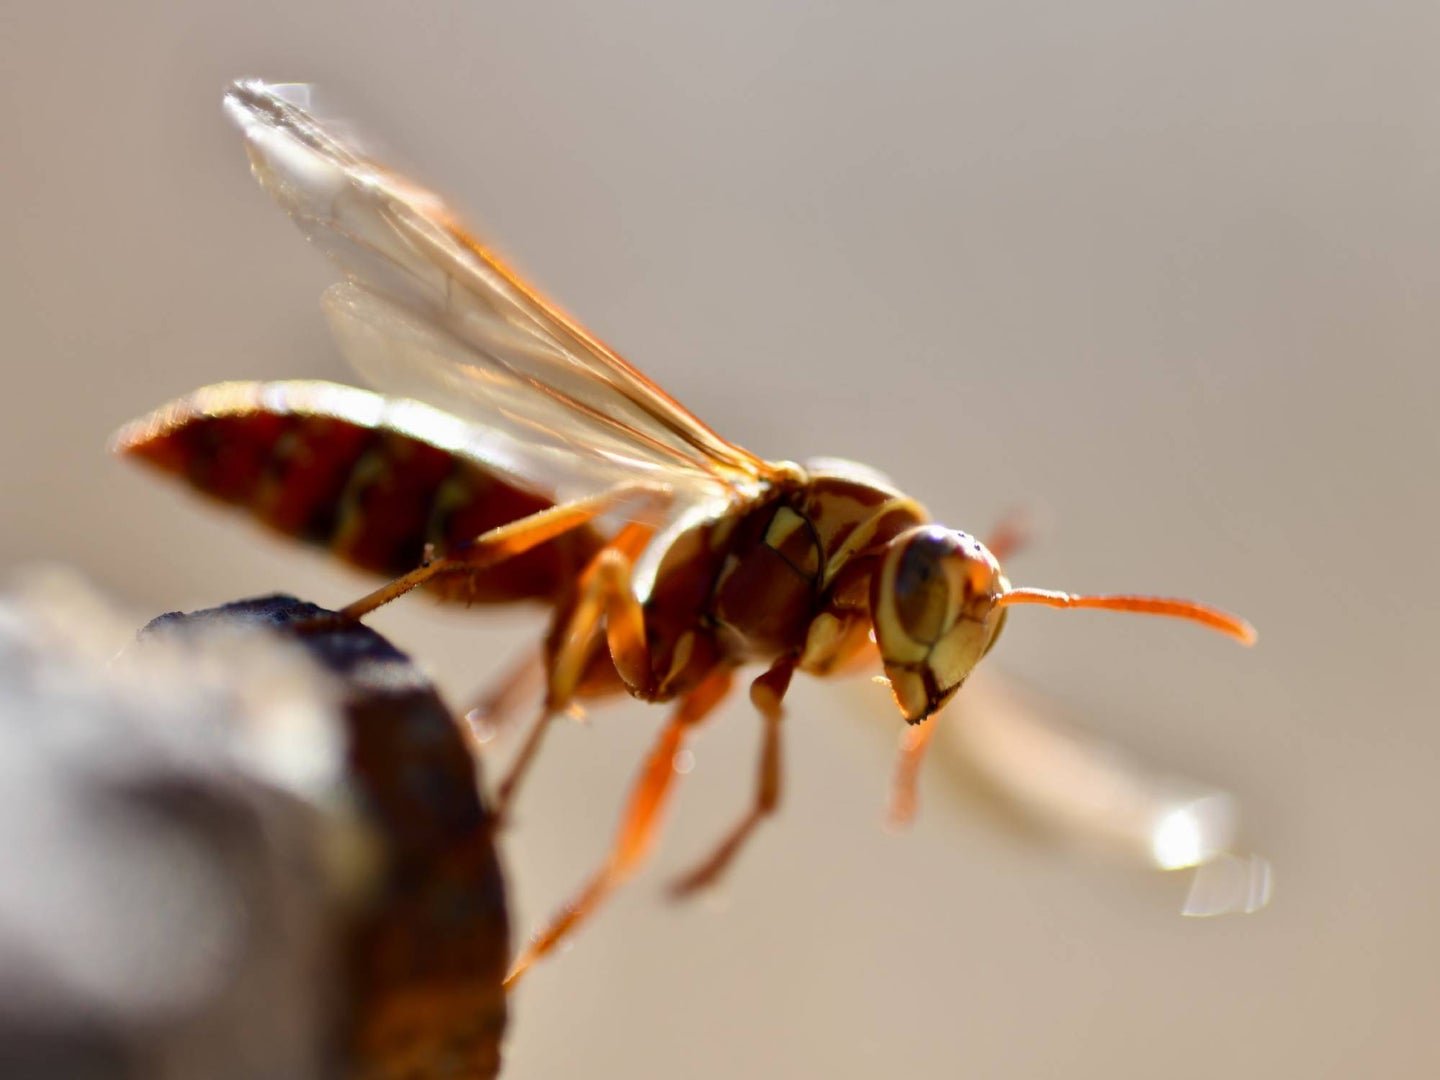 The most effective ways to avoid bee, wasp, and hornet stings